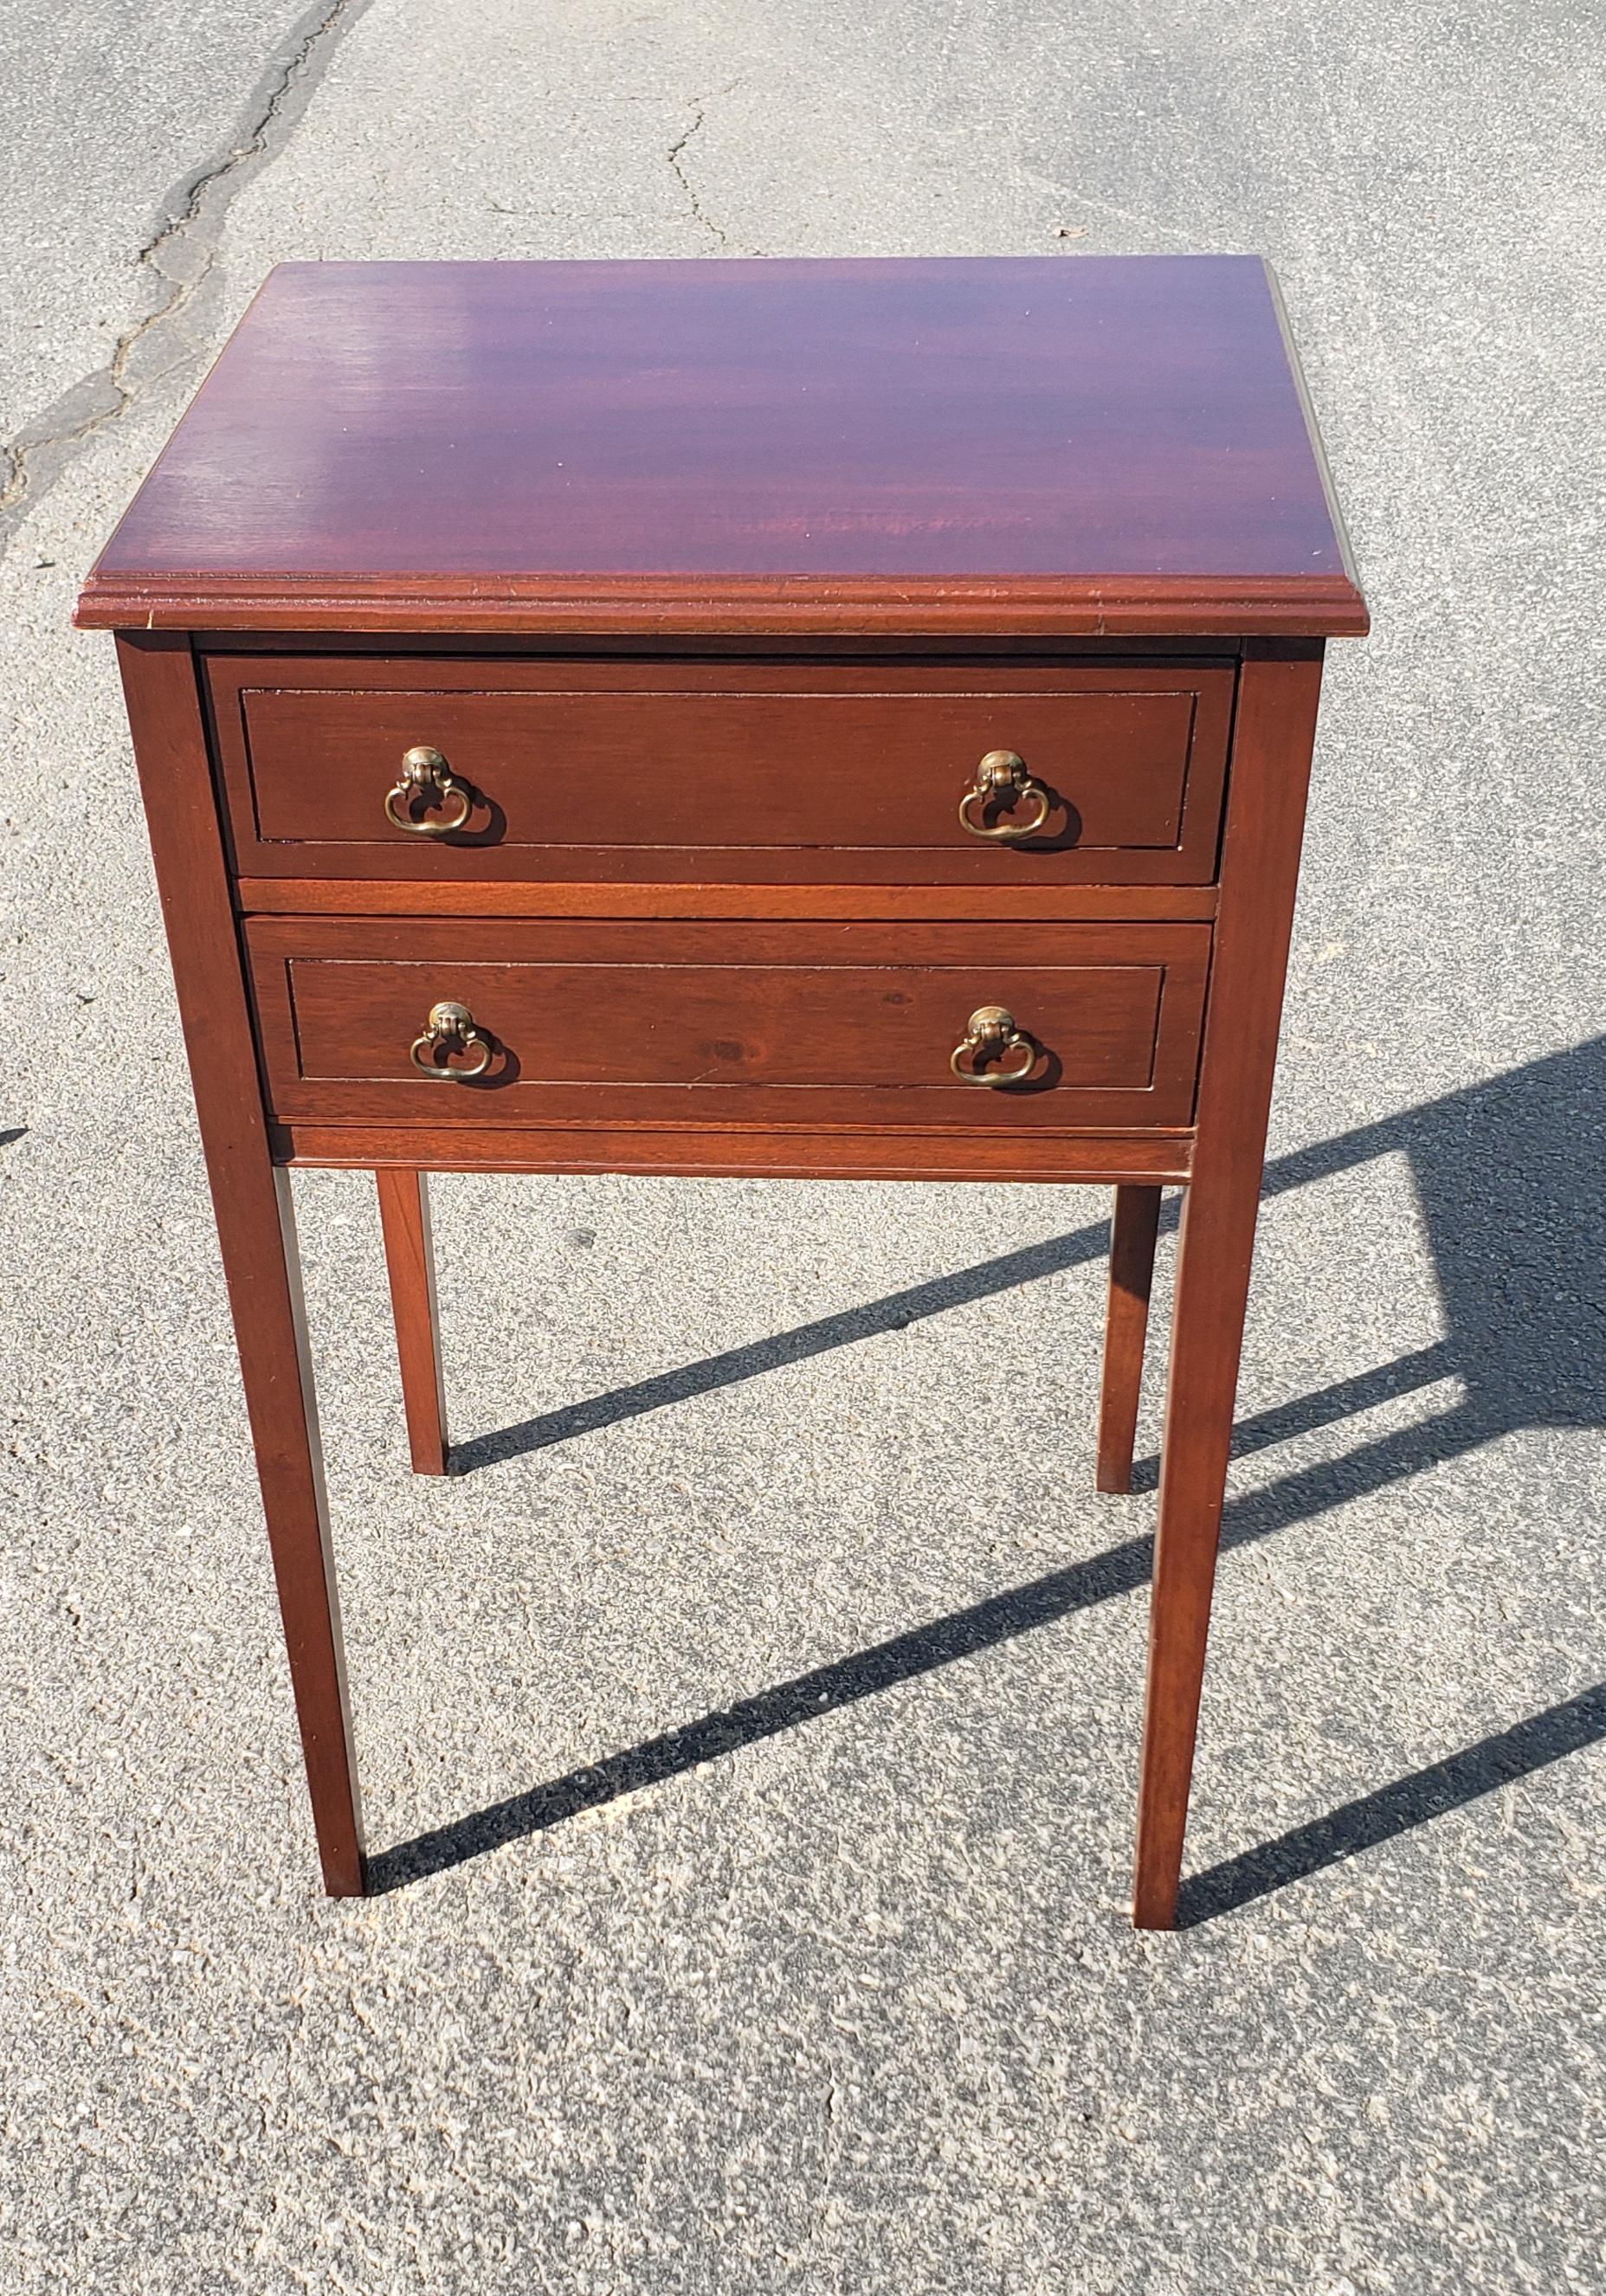 Brass 1940s Regency Two-Drawers Mahogany Side Tables by Mersman Furniture, a Pair For Sale